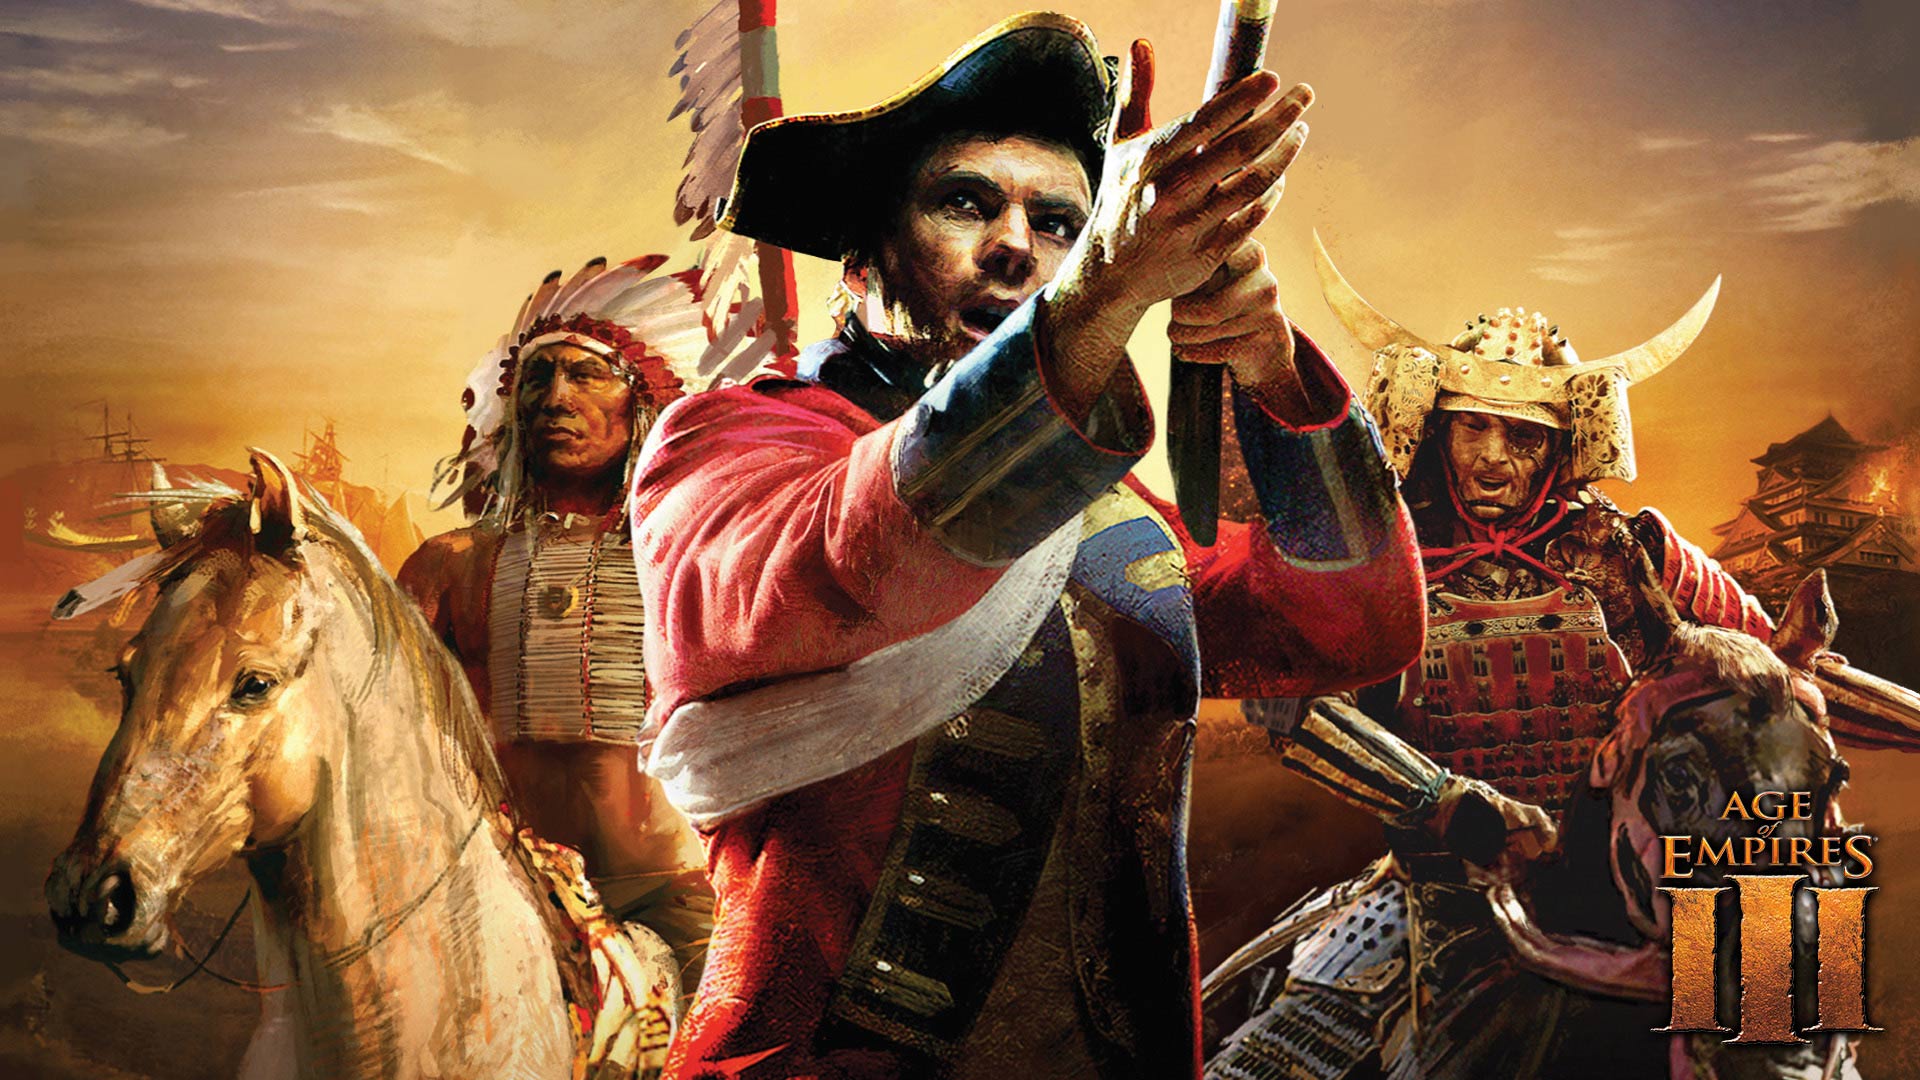 video game, age of empires iii, age of empires